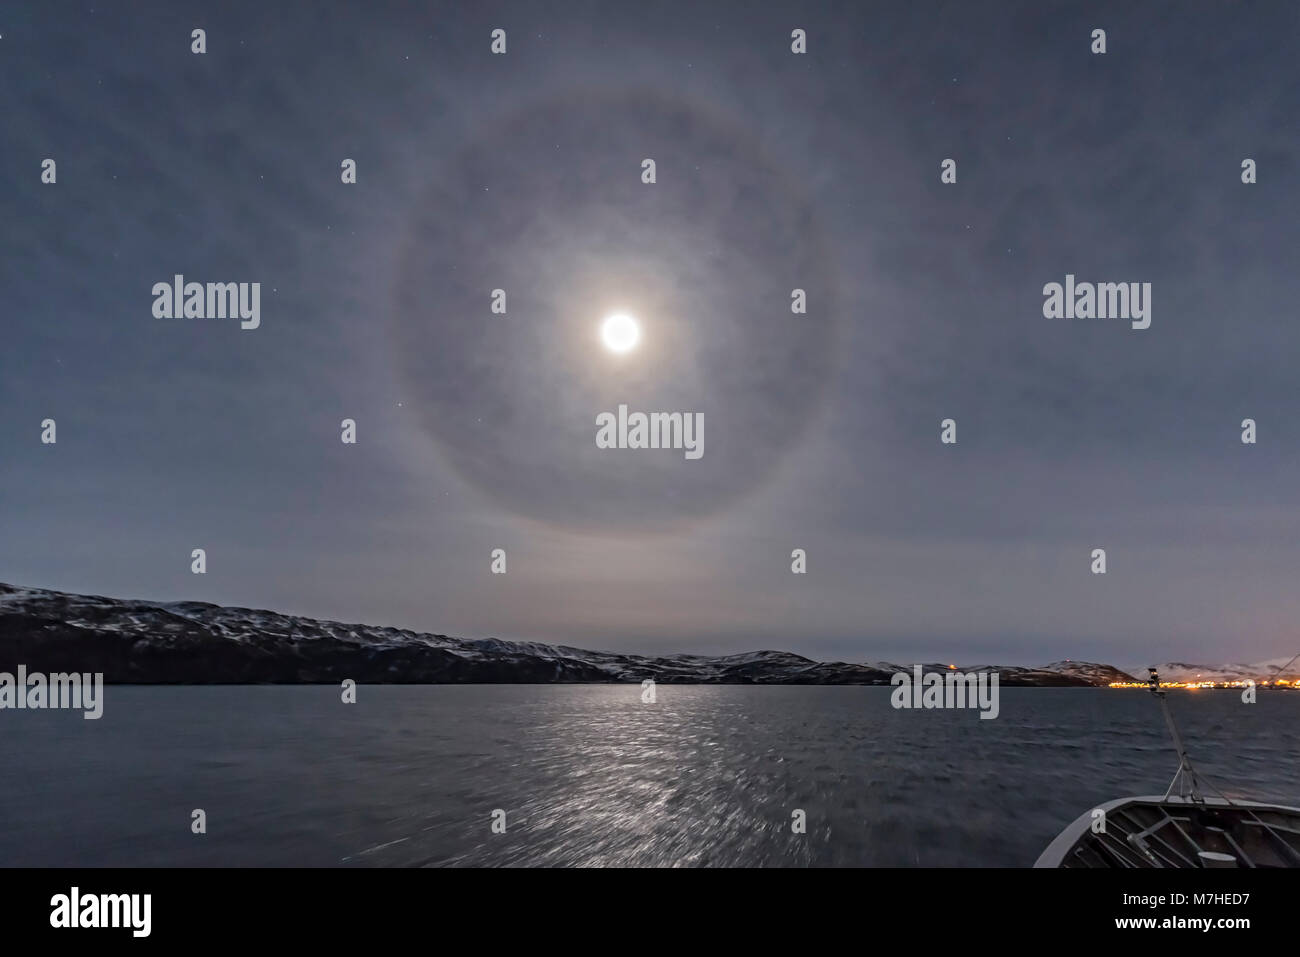 A halo around the nearly full moon over the Barents Sea in northern Norway. Stock Photo